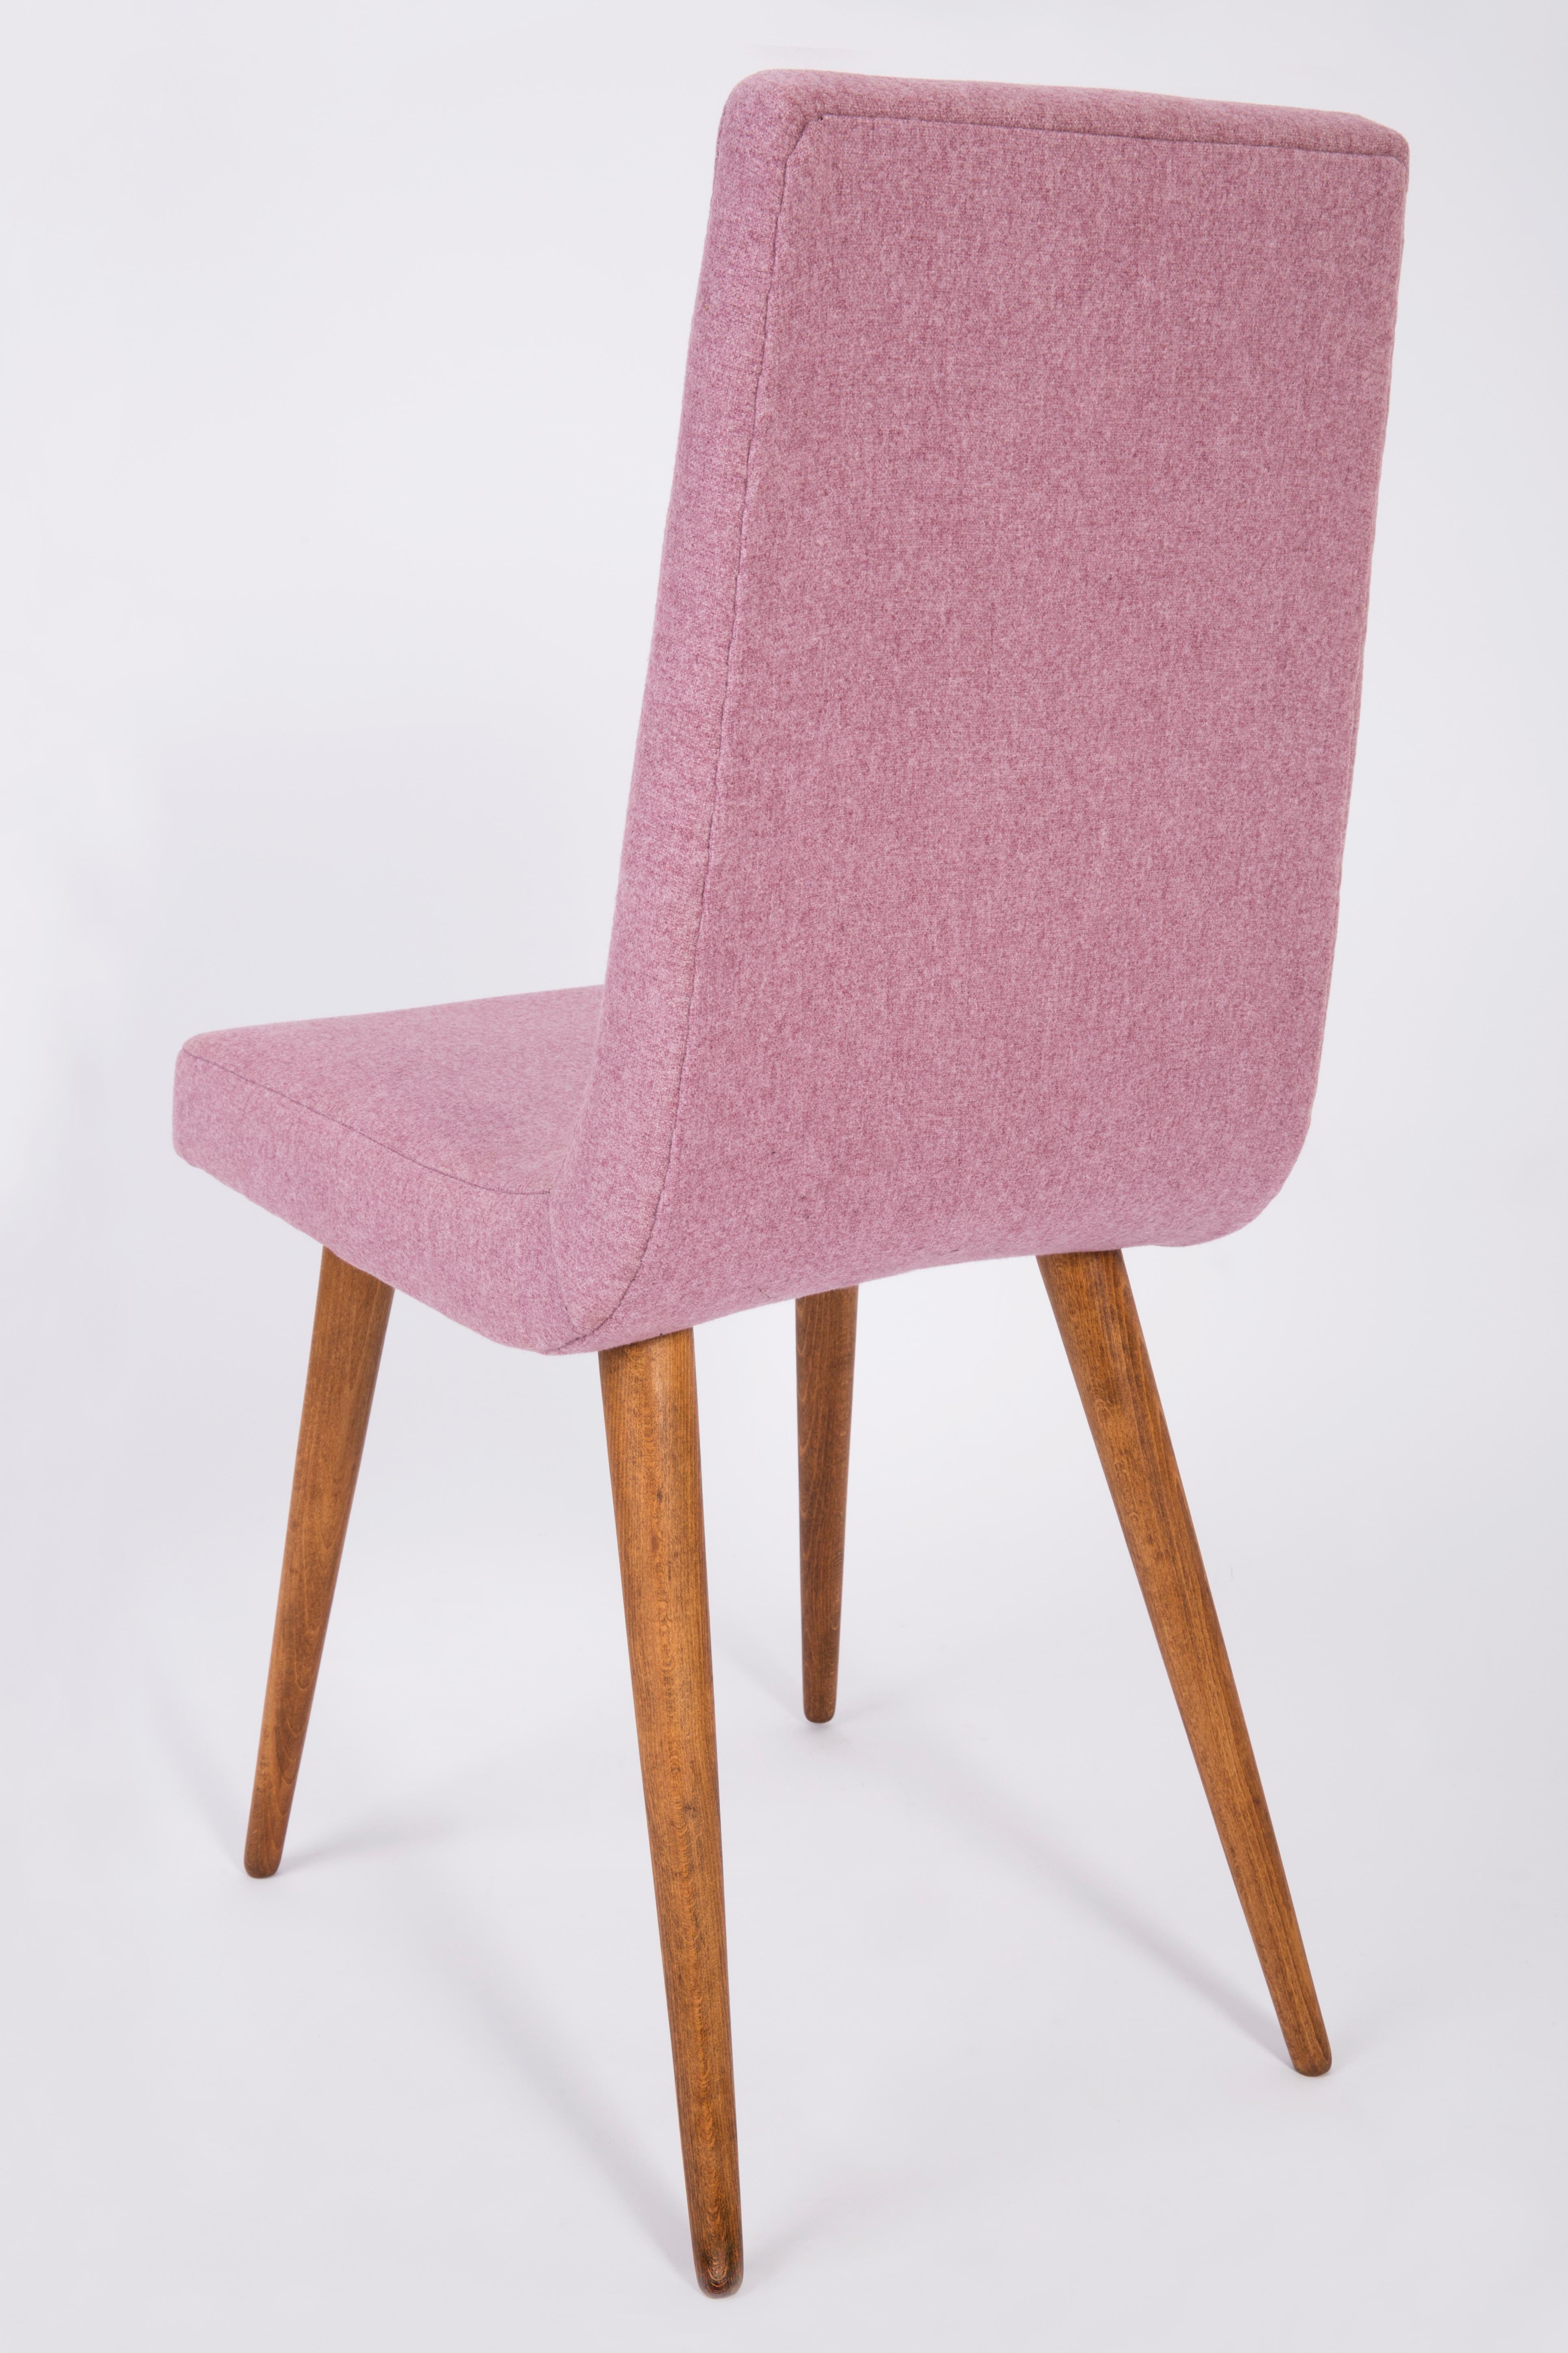 Set of Four Mid-Century Vintage Pink Melange Chairs, Europe, 1960s For Sale 2